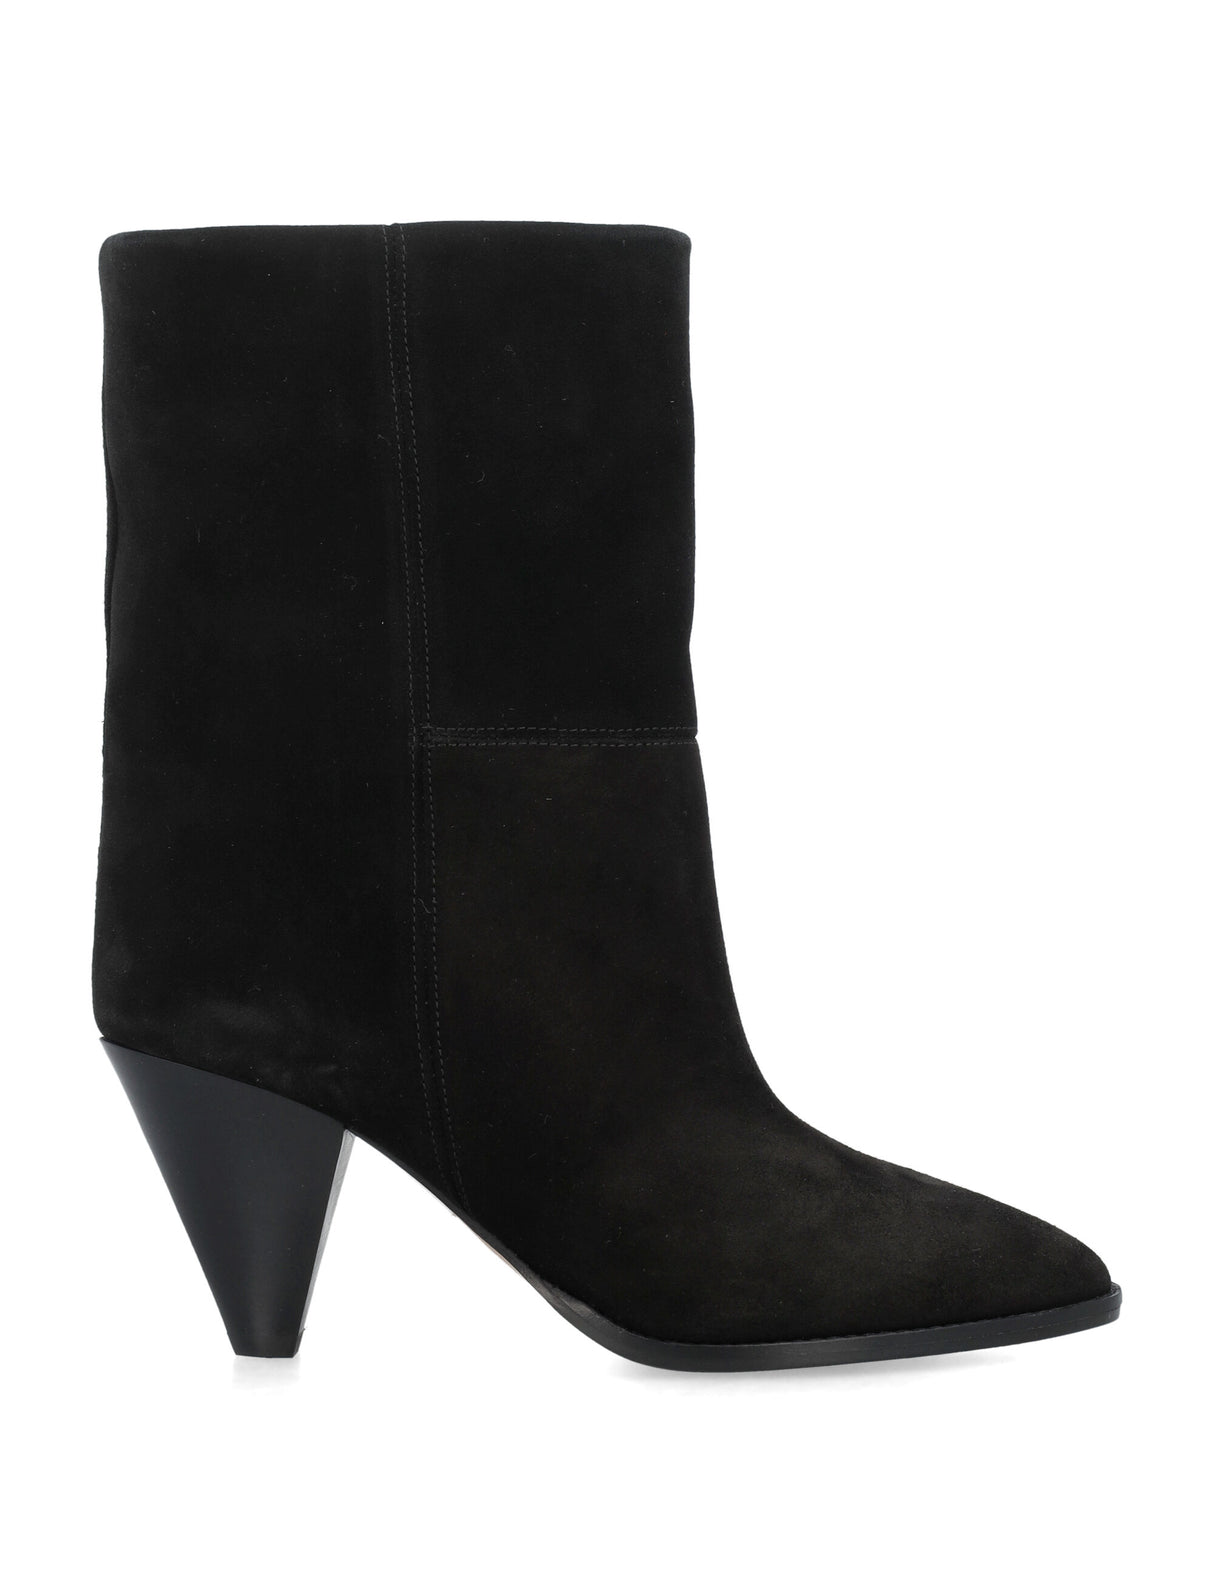 Rouxa Suede Leather Boots - Black